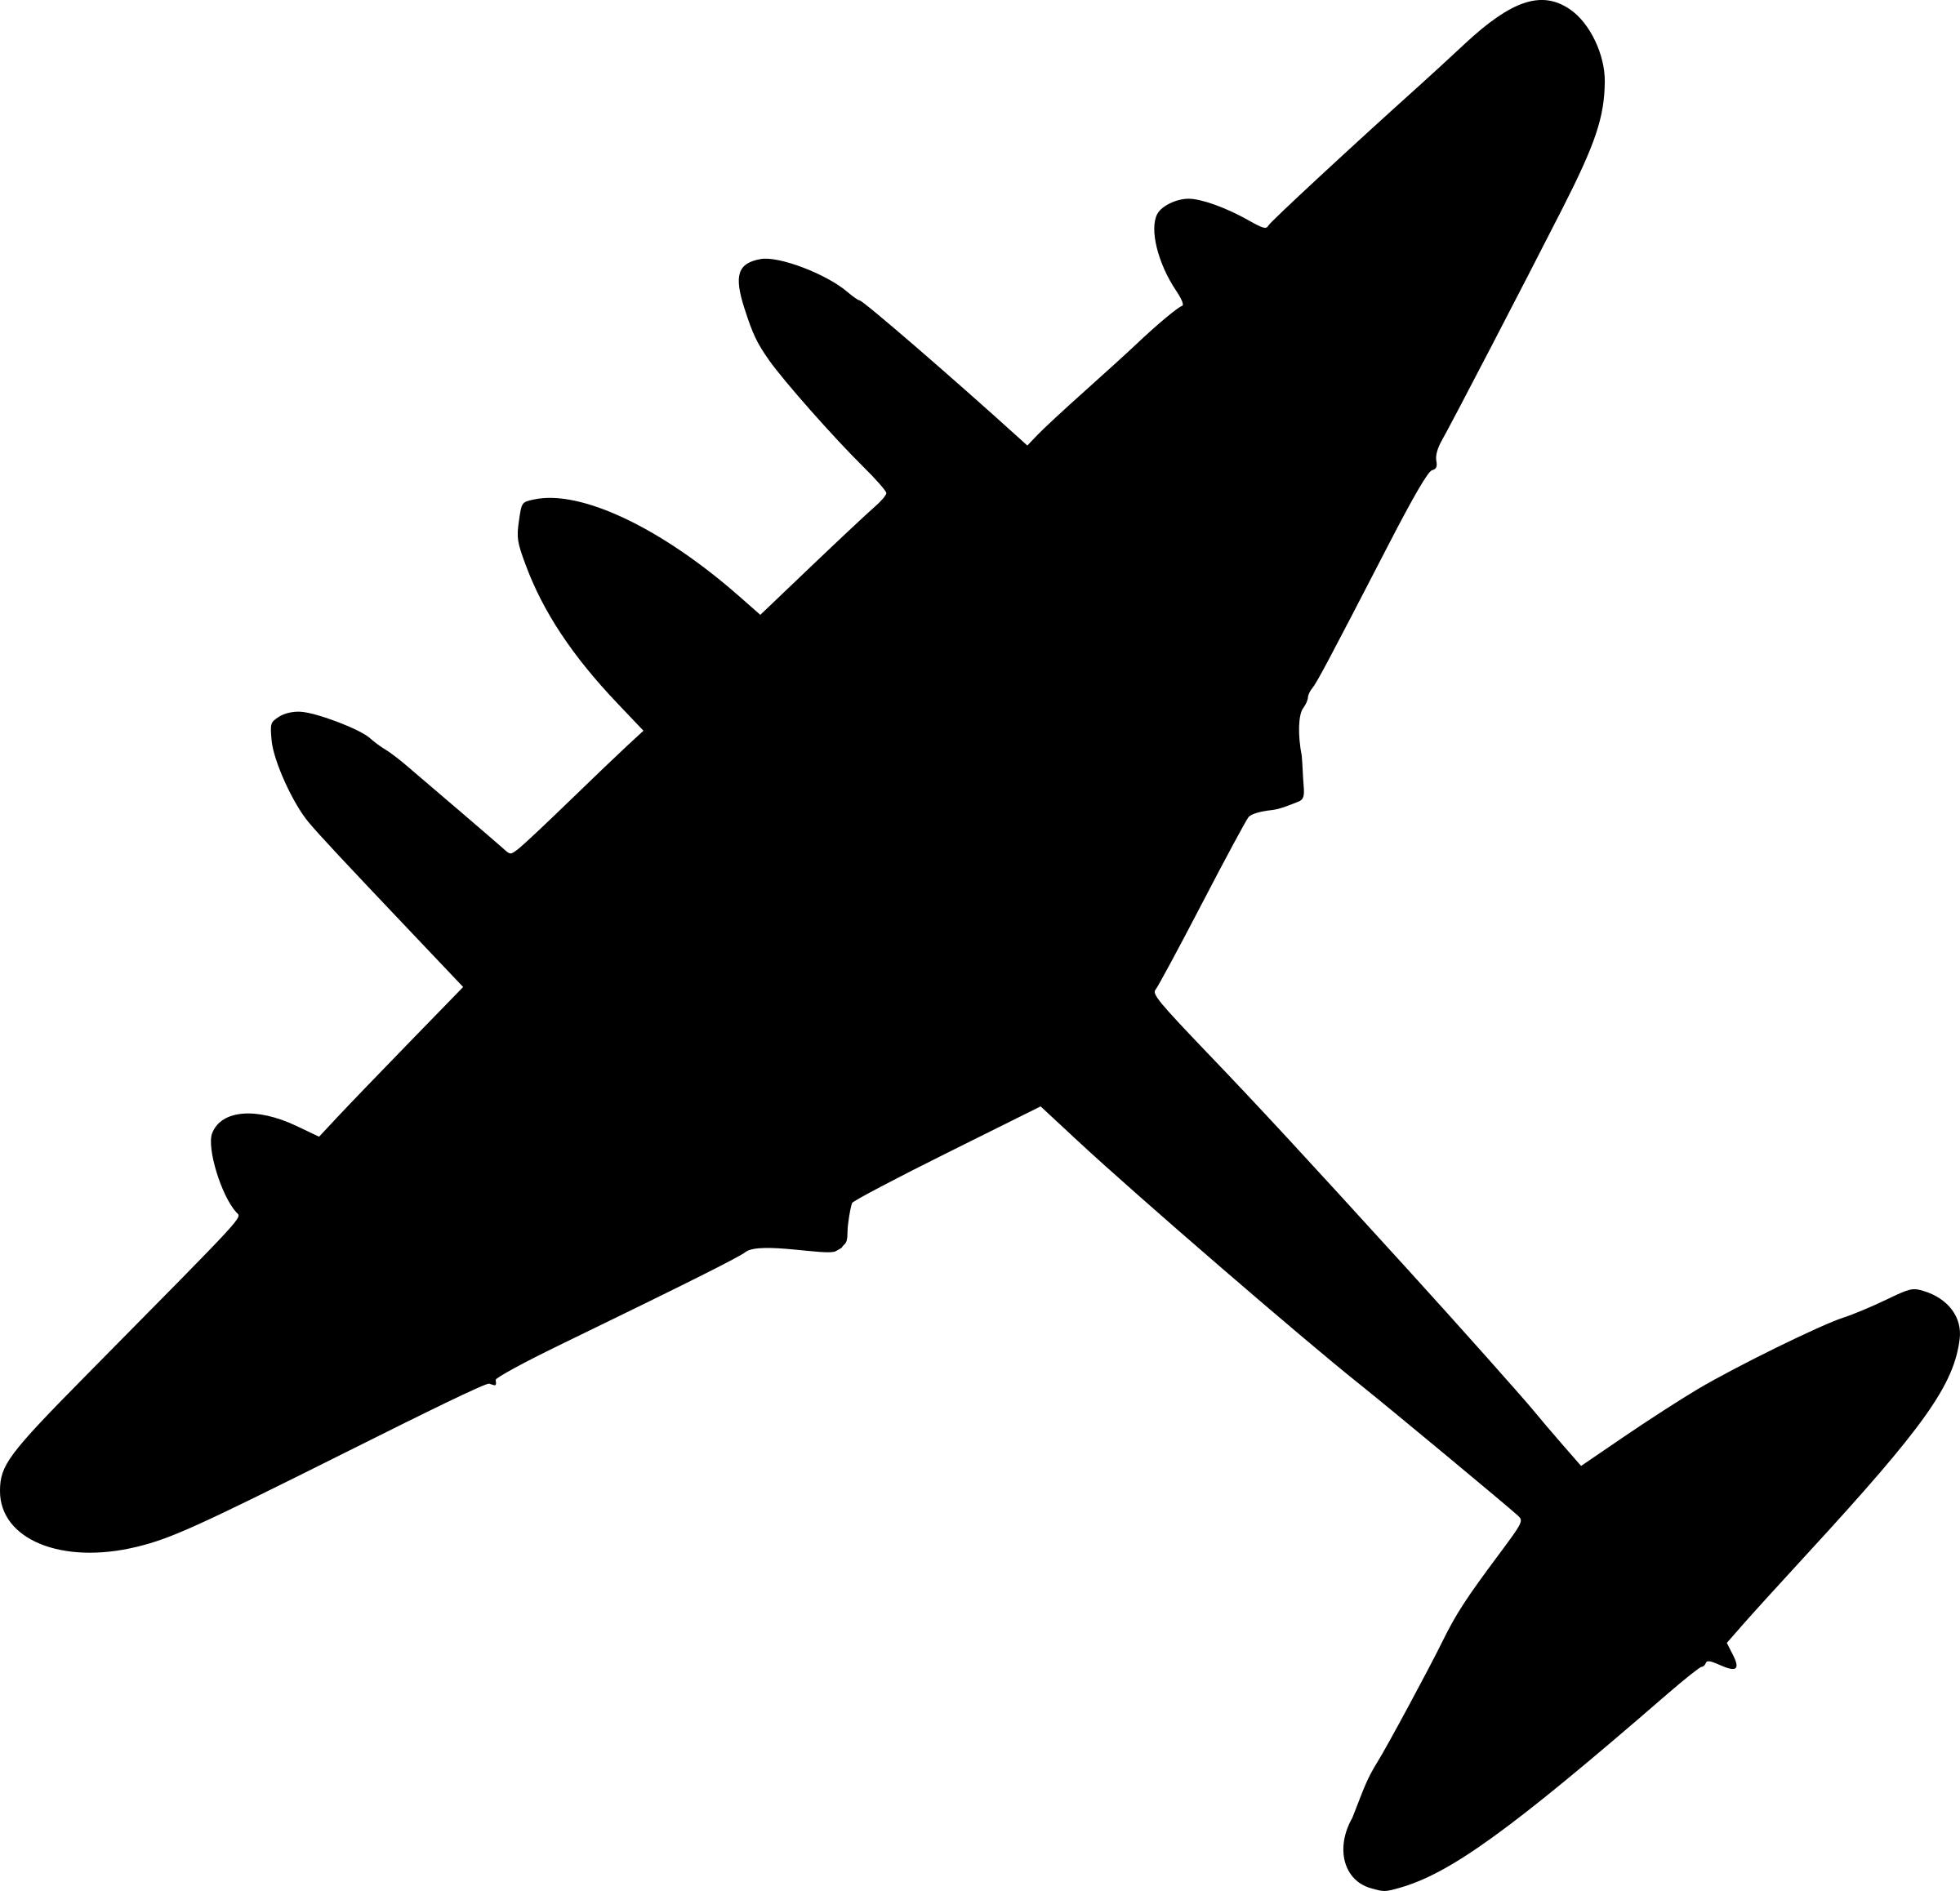 mosquito plane png